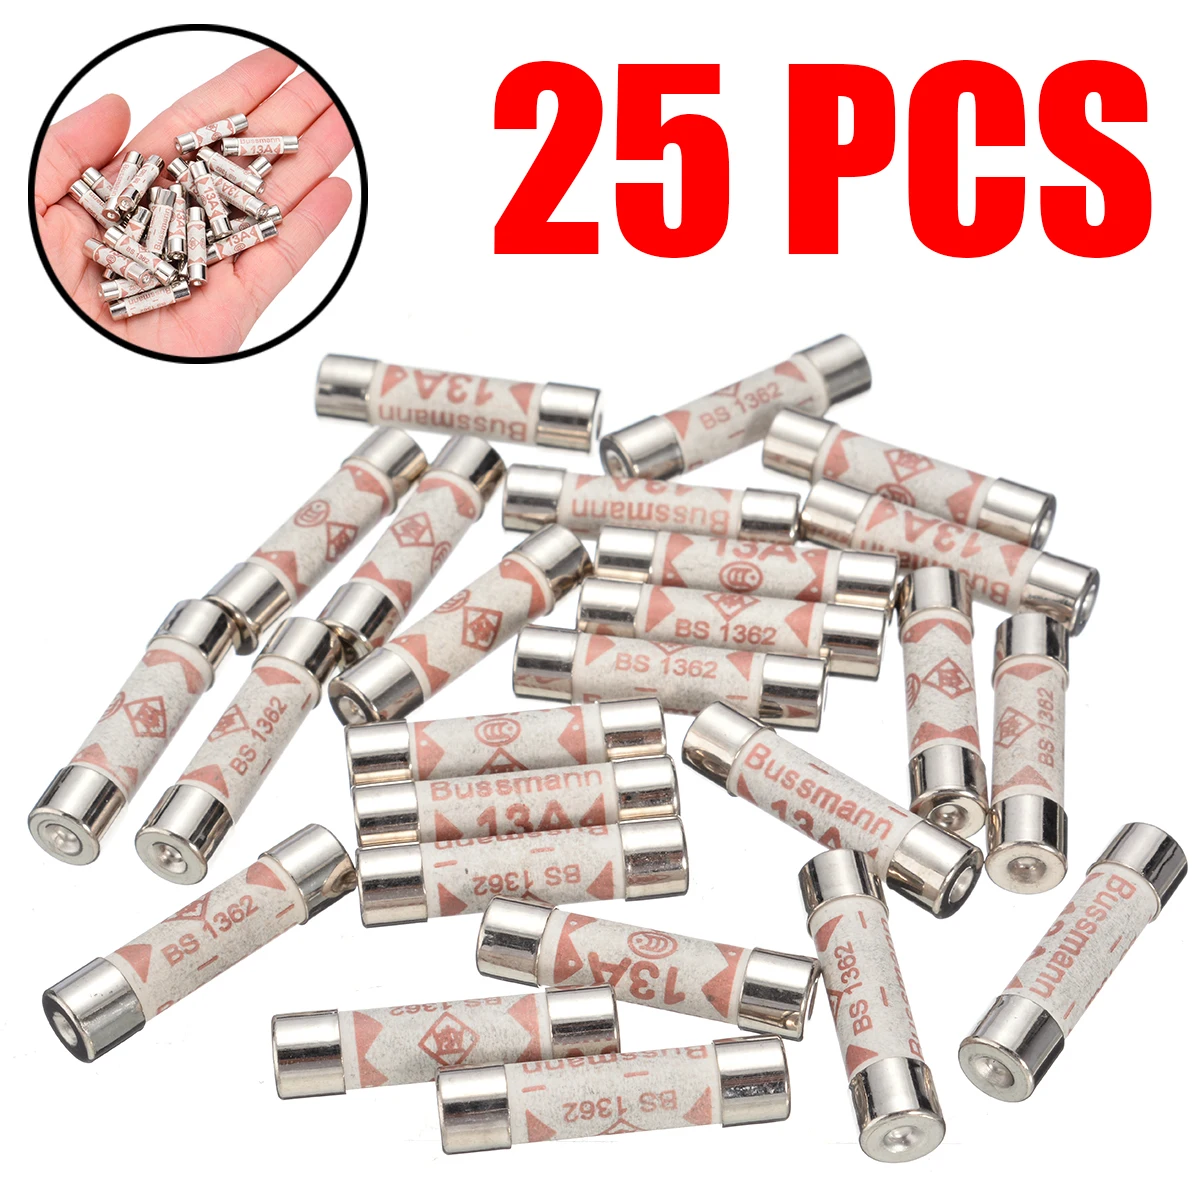 10 x 13amp Domestic Fuses Household 13a House Mains 3 pin UK Plug Top Fuse 